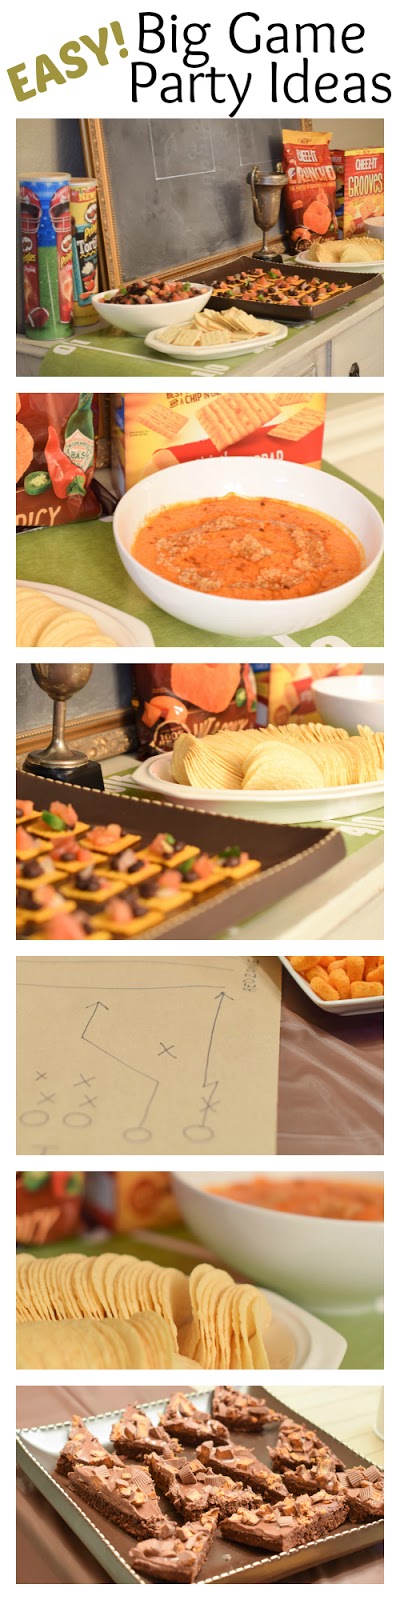 Easy party ideas for your Big Game Party! An easy to throw party for the Big Game. Features easy party ideas for snacks, dips and decor. Includes a recipe for Roasted Red Pepper Hummus without seeds! #BigGameSnacks #collectiveBias #ad 